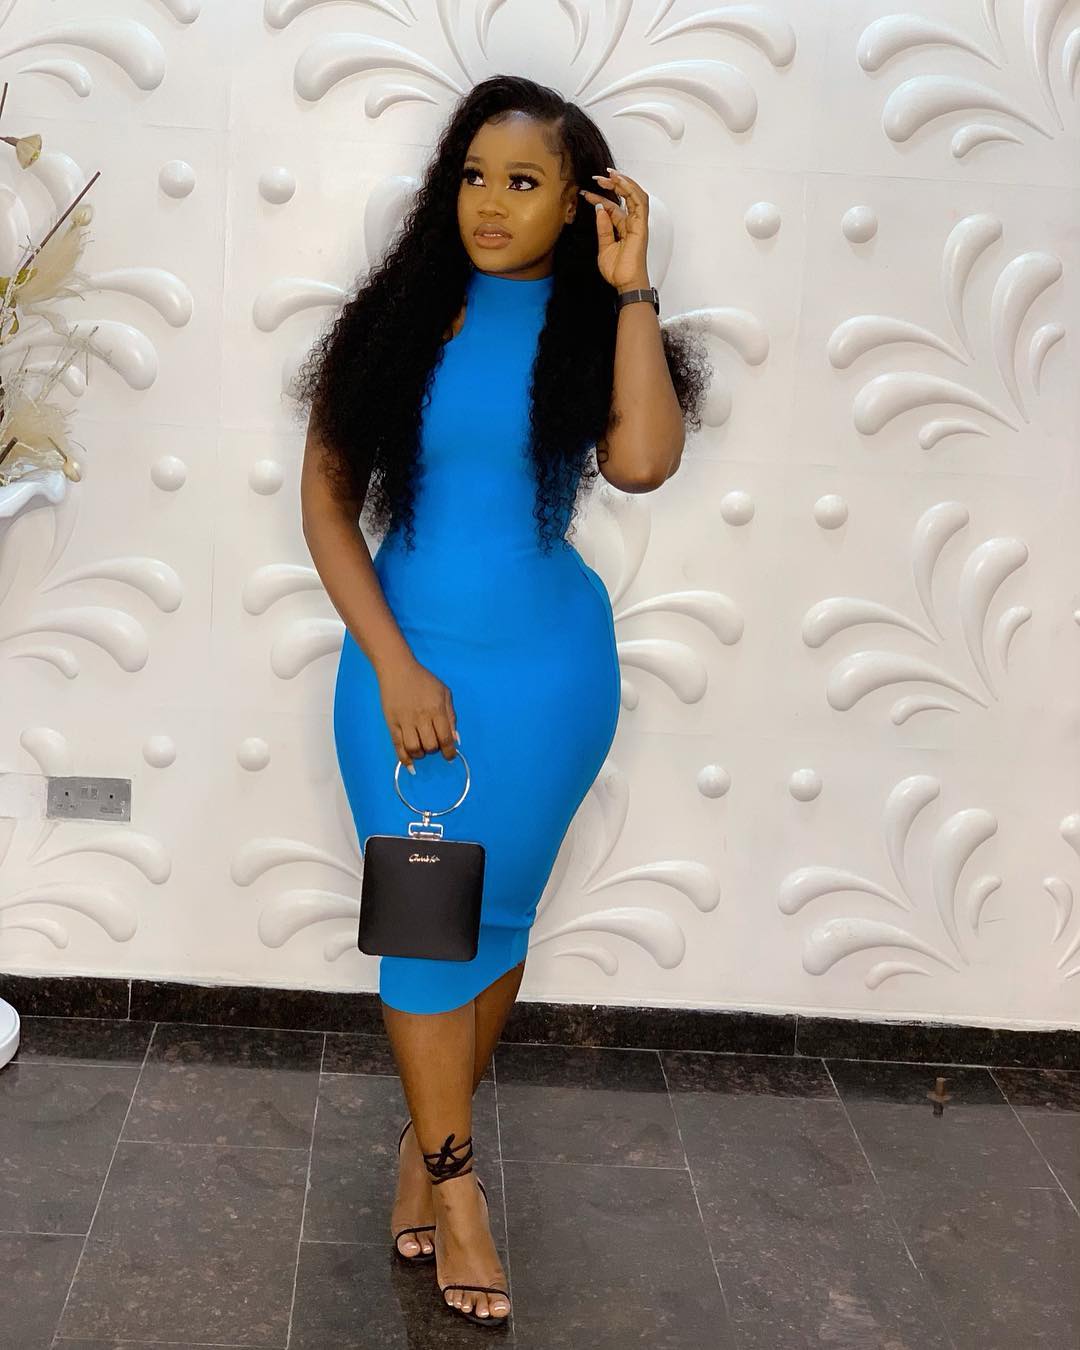 Cee-Cee outfit to Paul OO Birthday recently is Stunning (PHOTO)